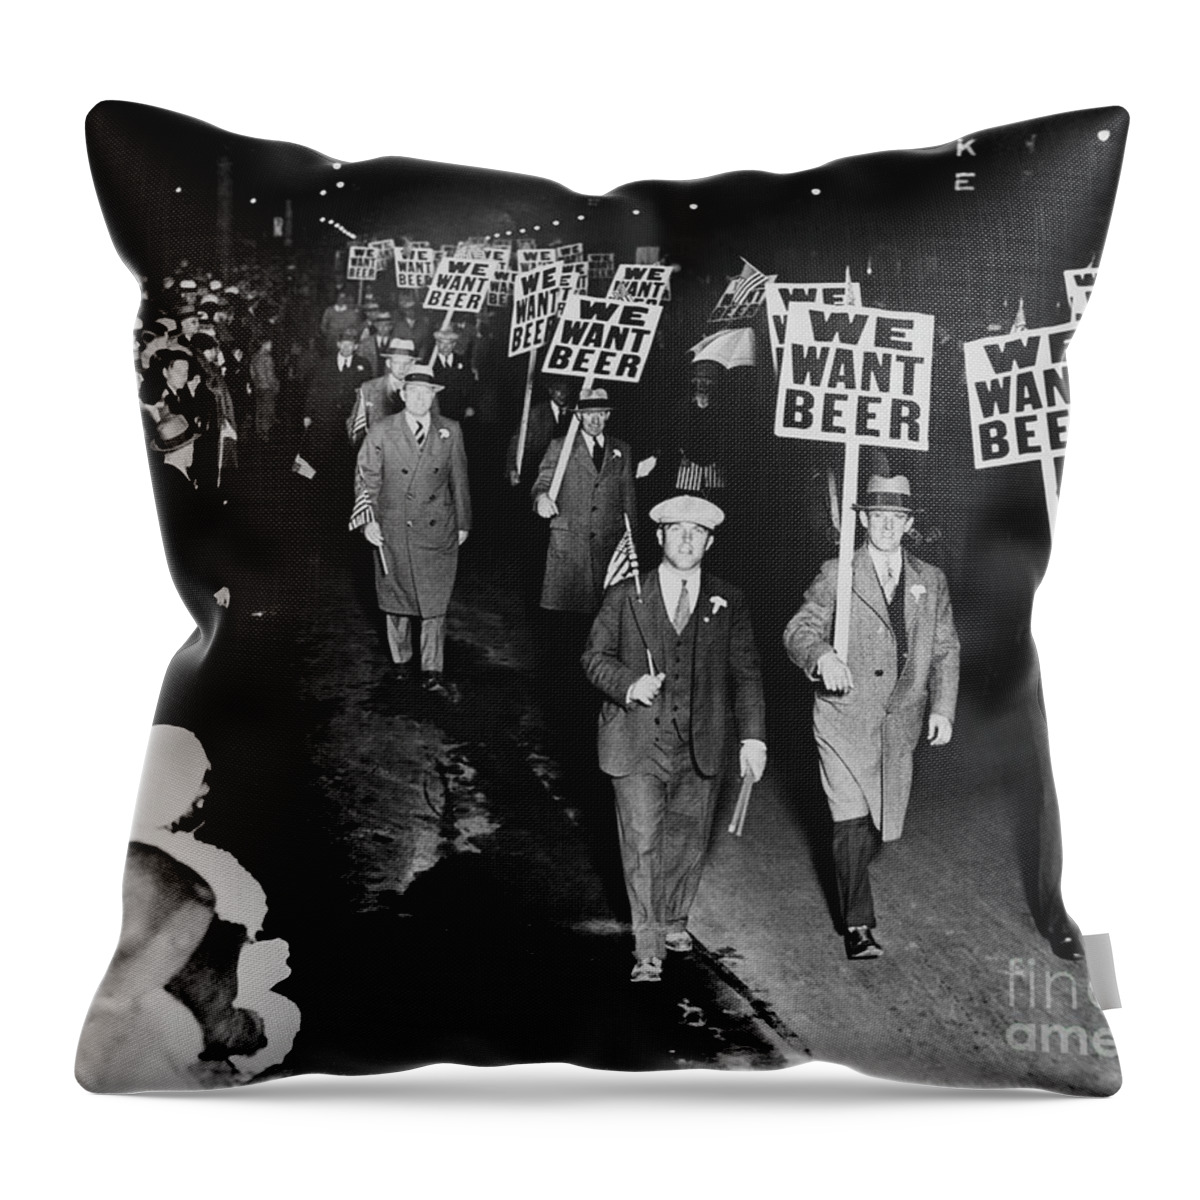 Prohibition Throw Pillow featuring the photograph We Want Beer by Jon Neidert